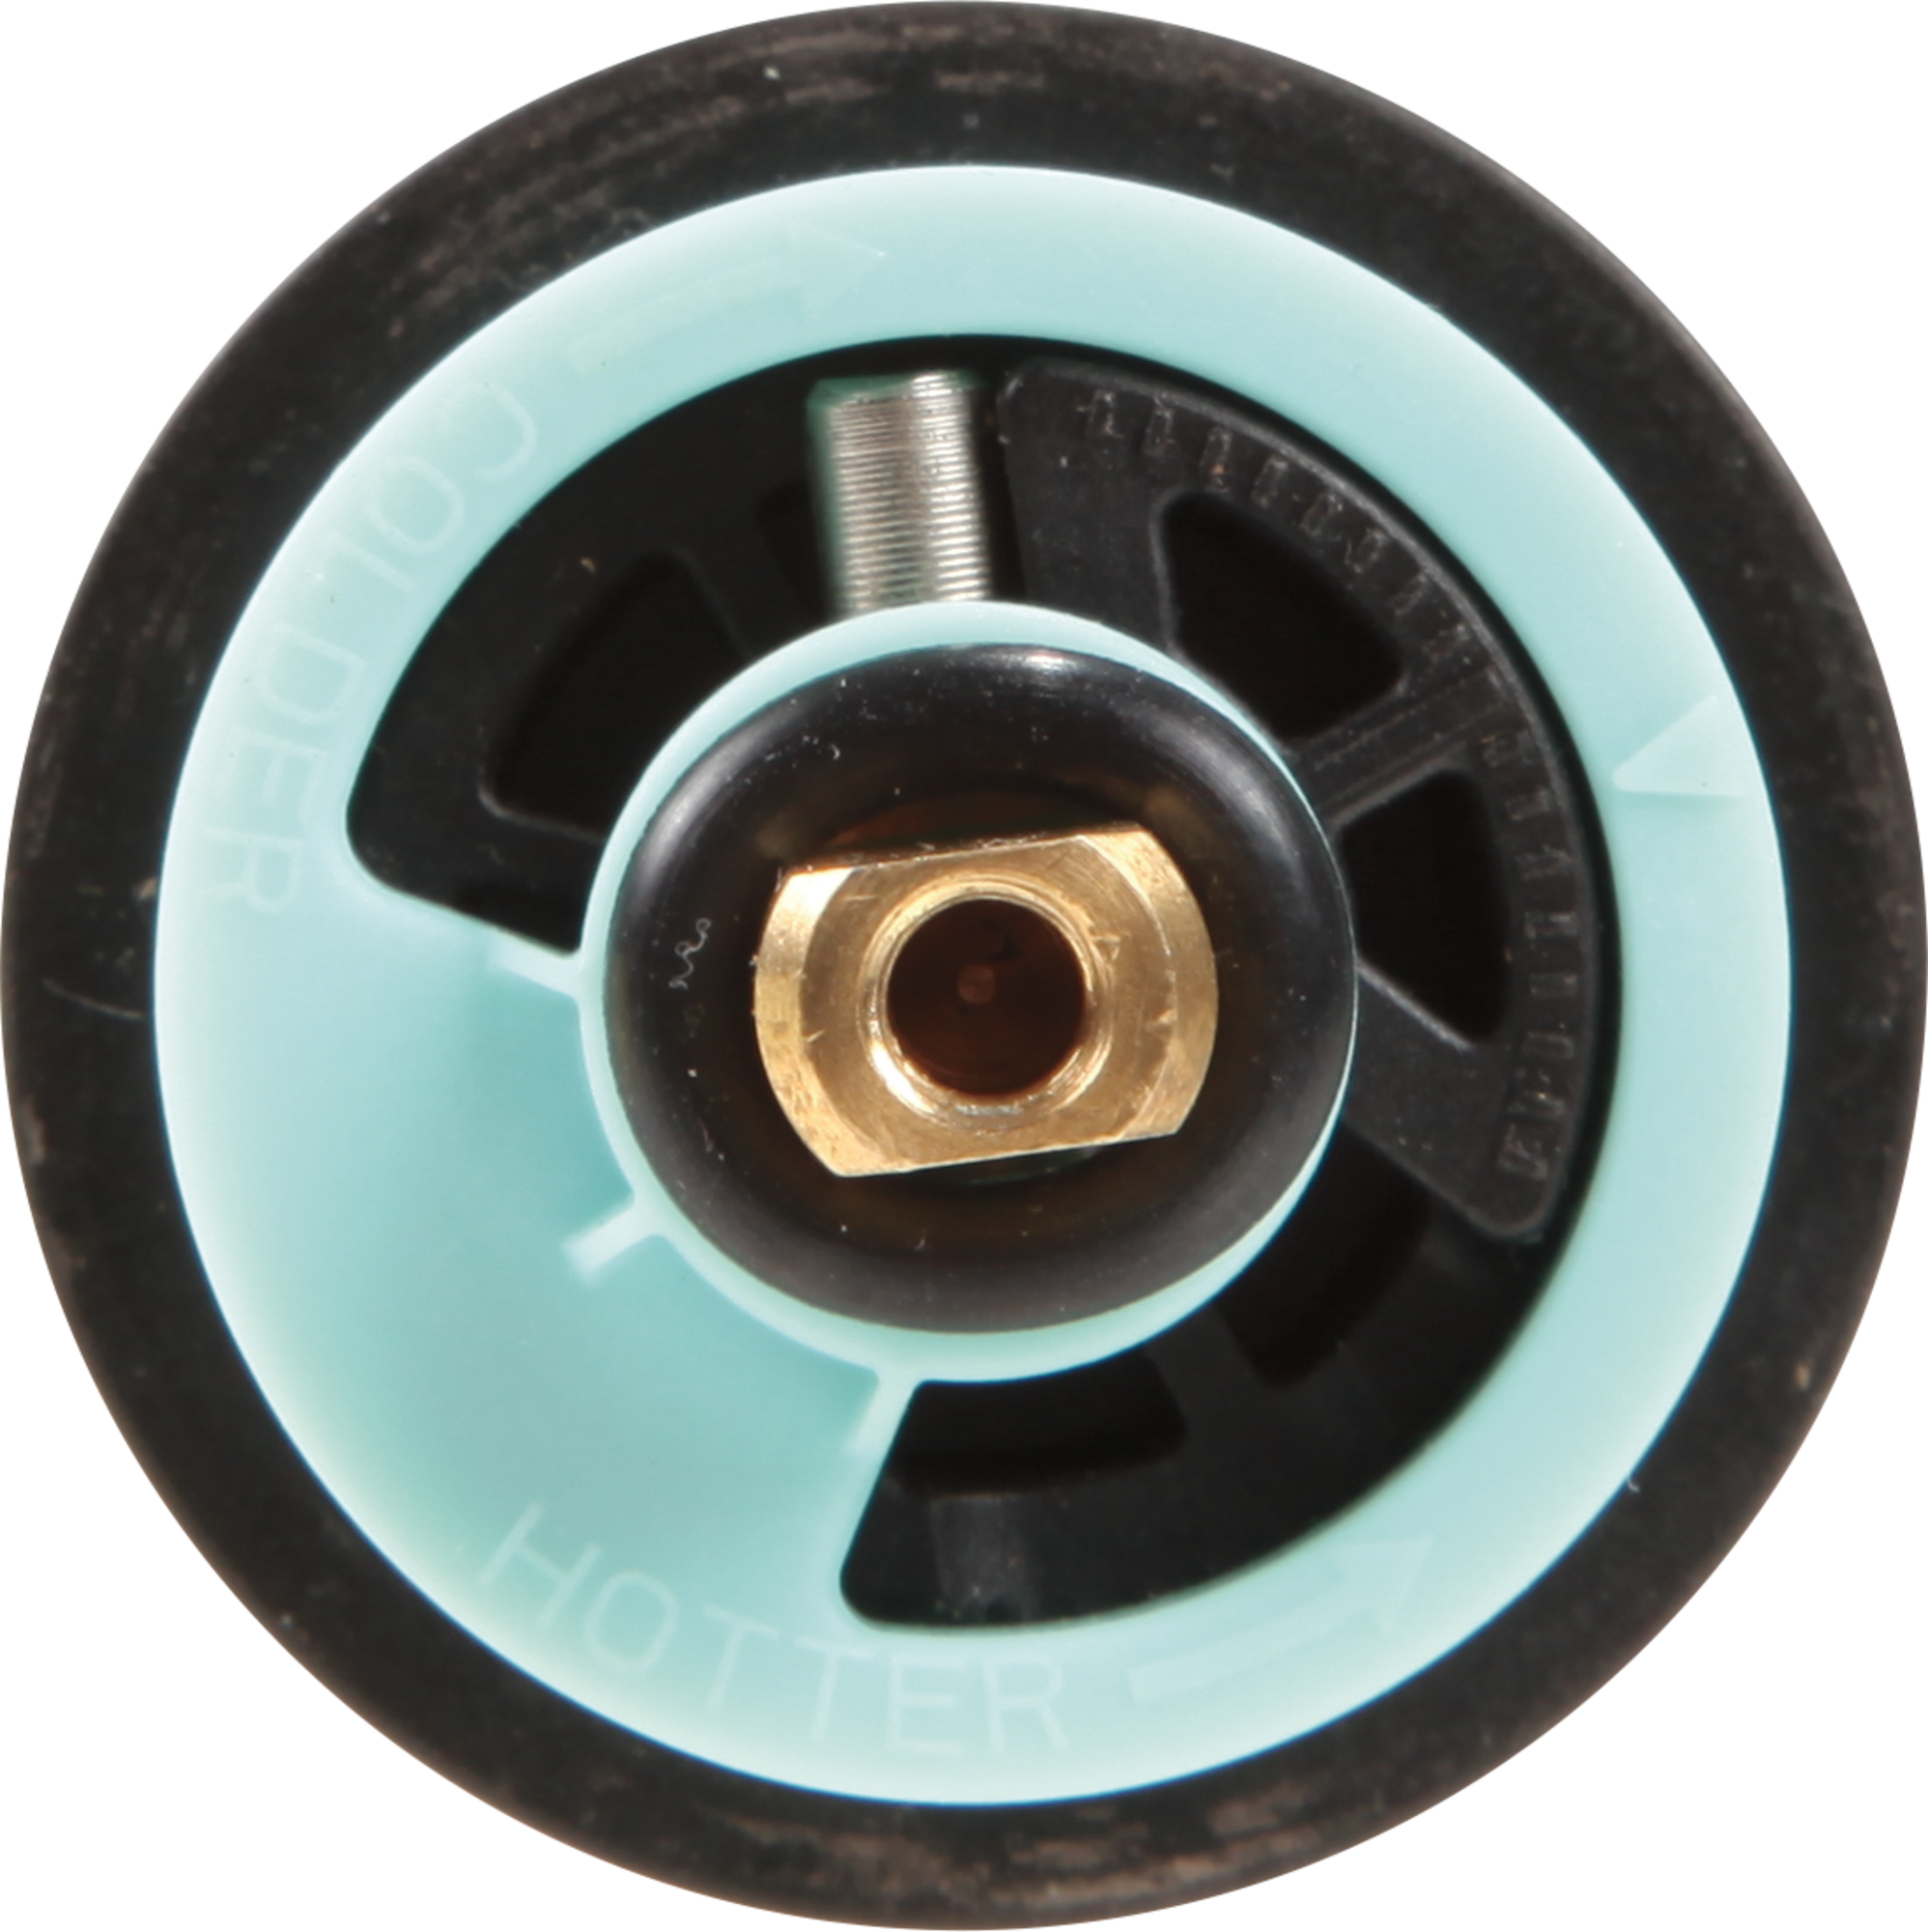 RP70538 Replacement for Peerless Shower Pressure Balance Cartridge 